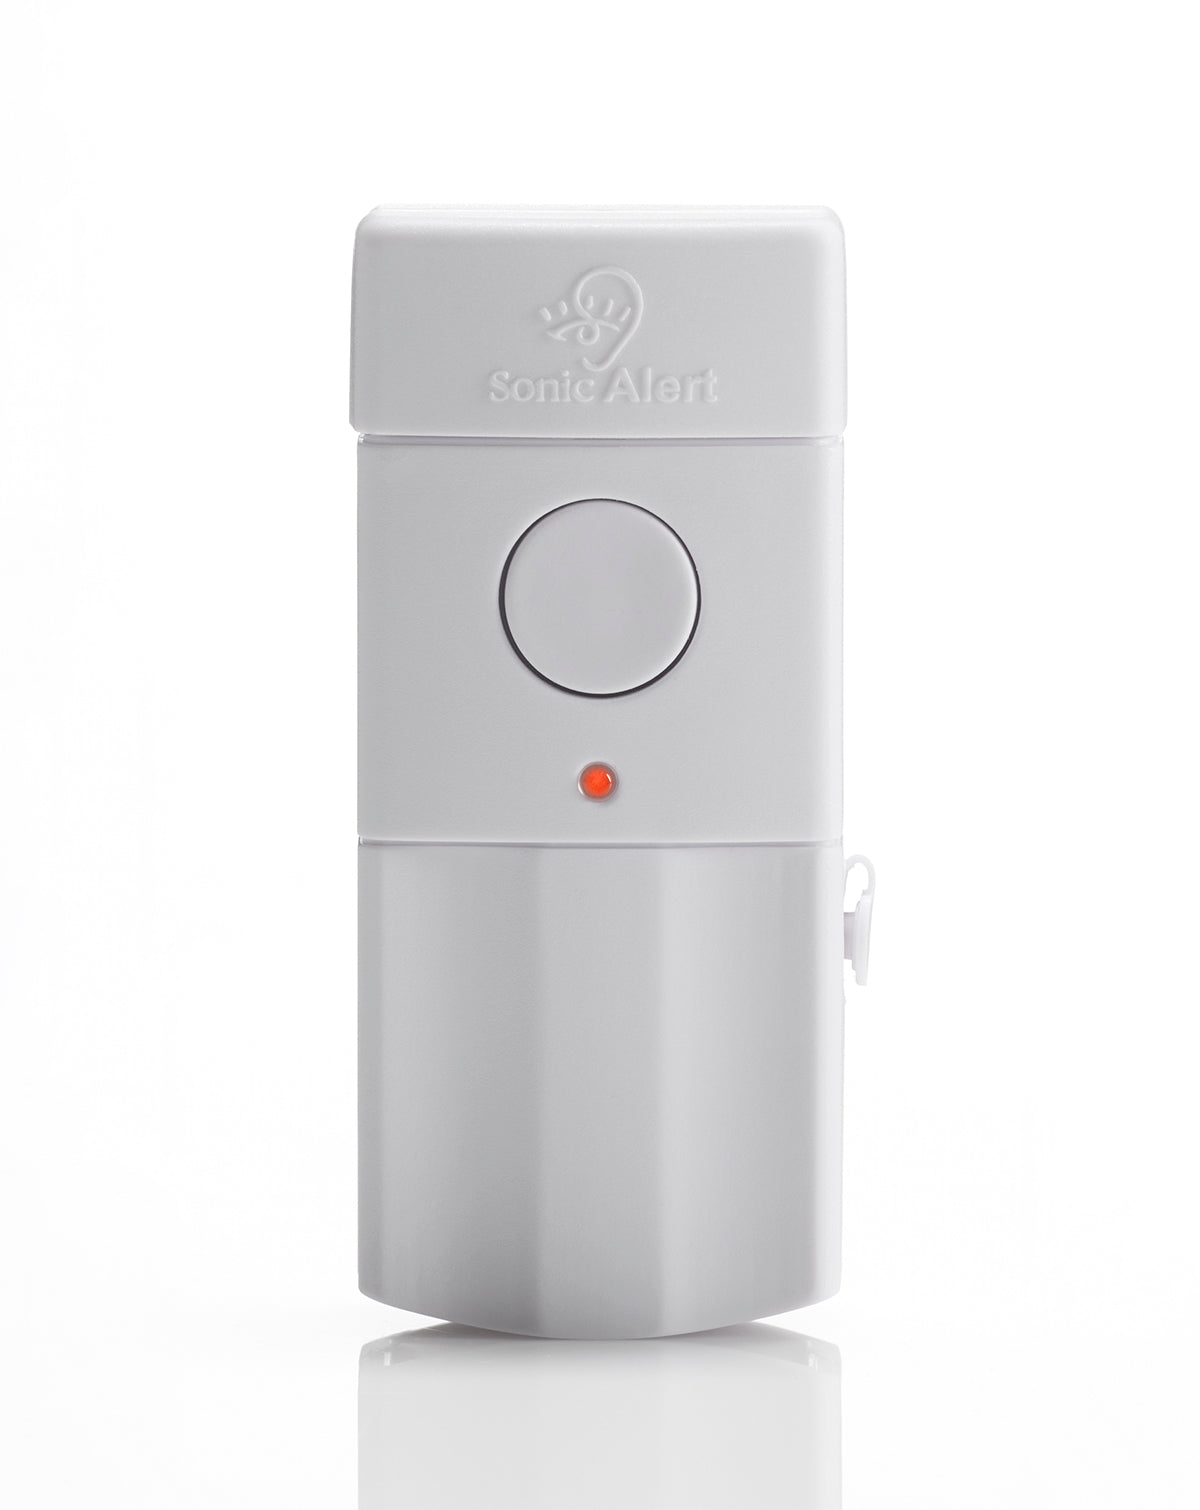 The HomeAware Transmitter HA360SA Security Alert (Doorbell) (Optional Accessory) by Sonic Alert